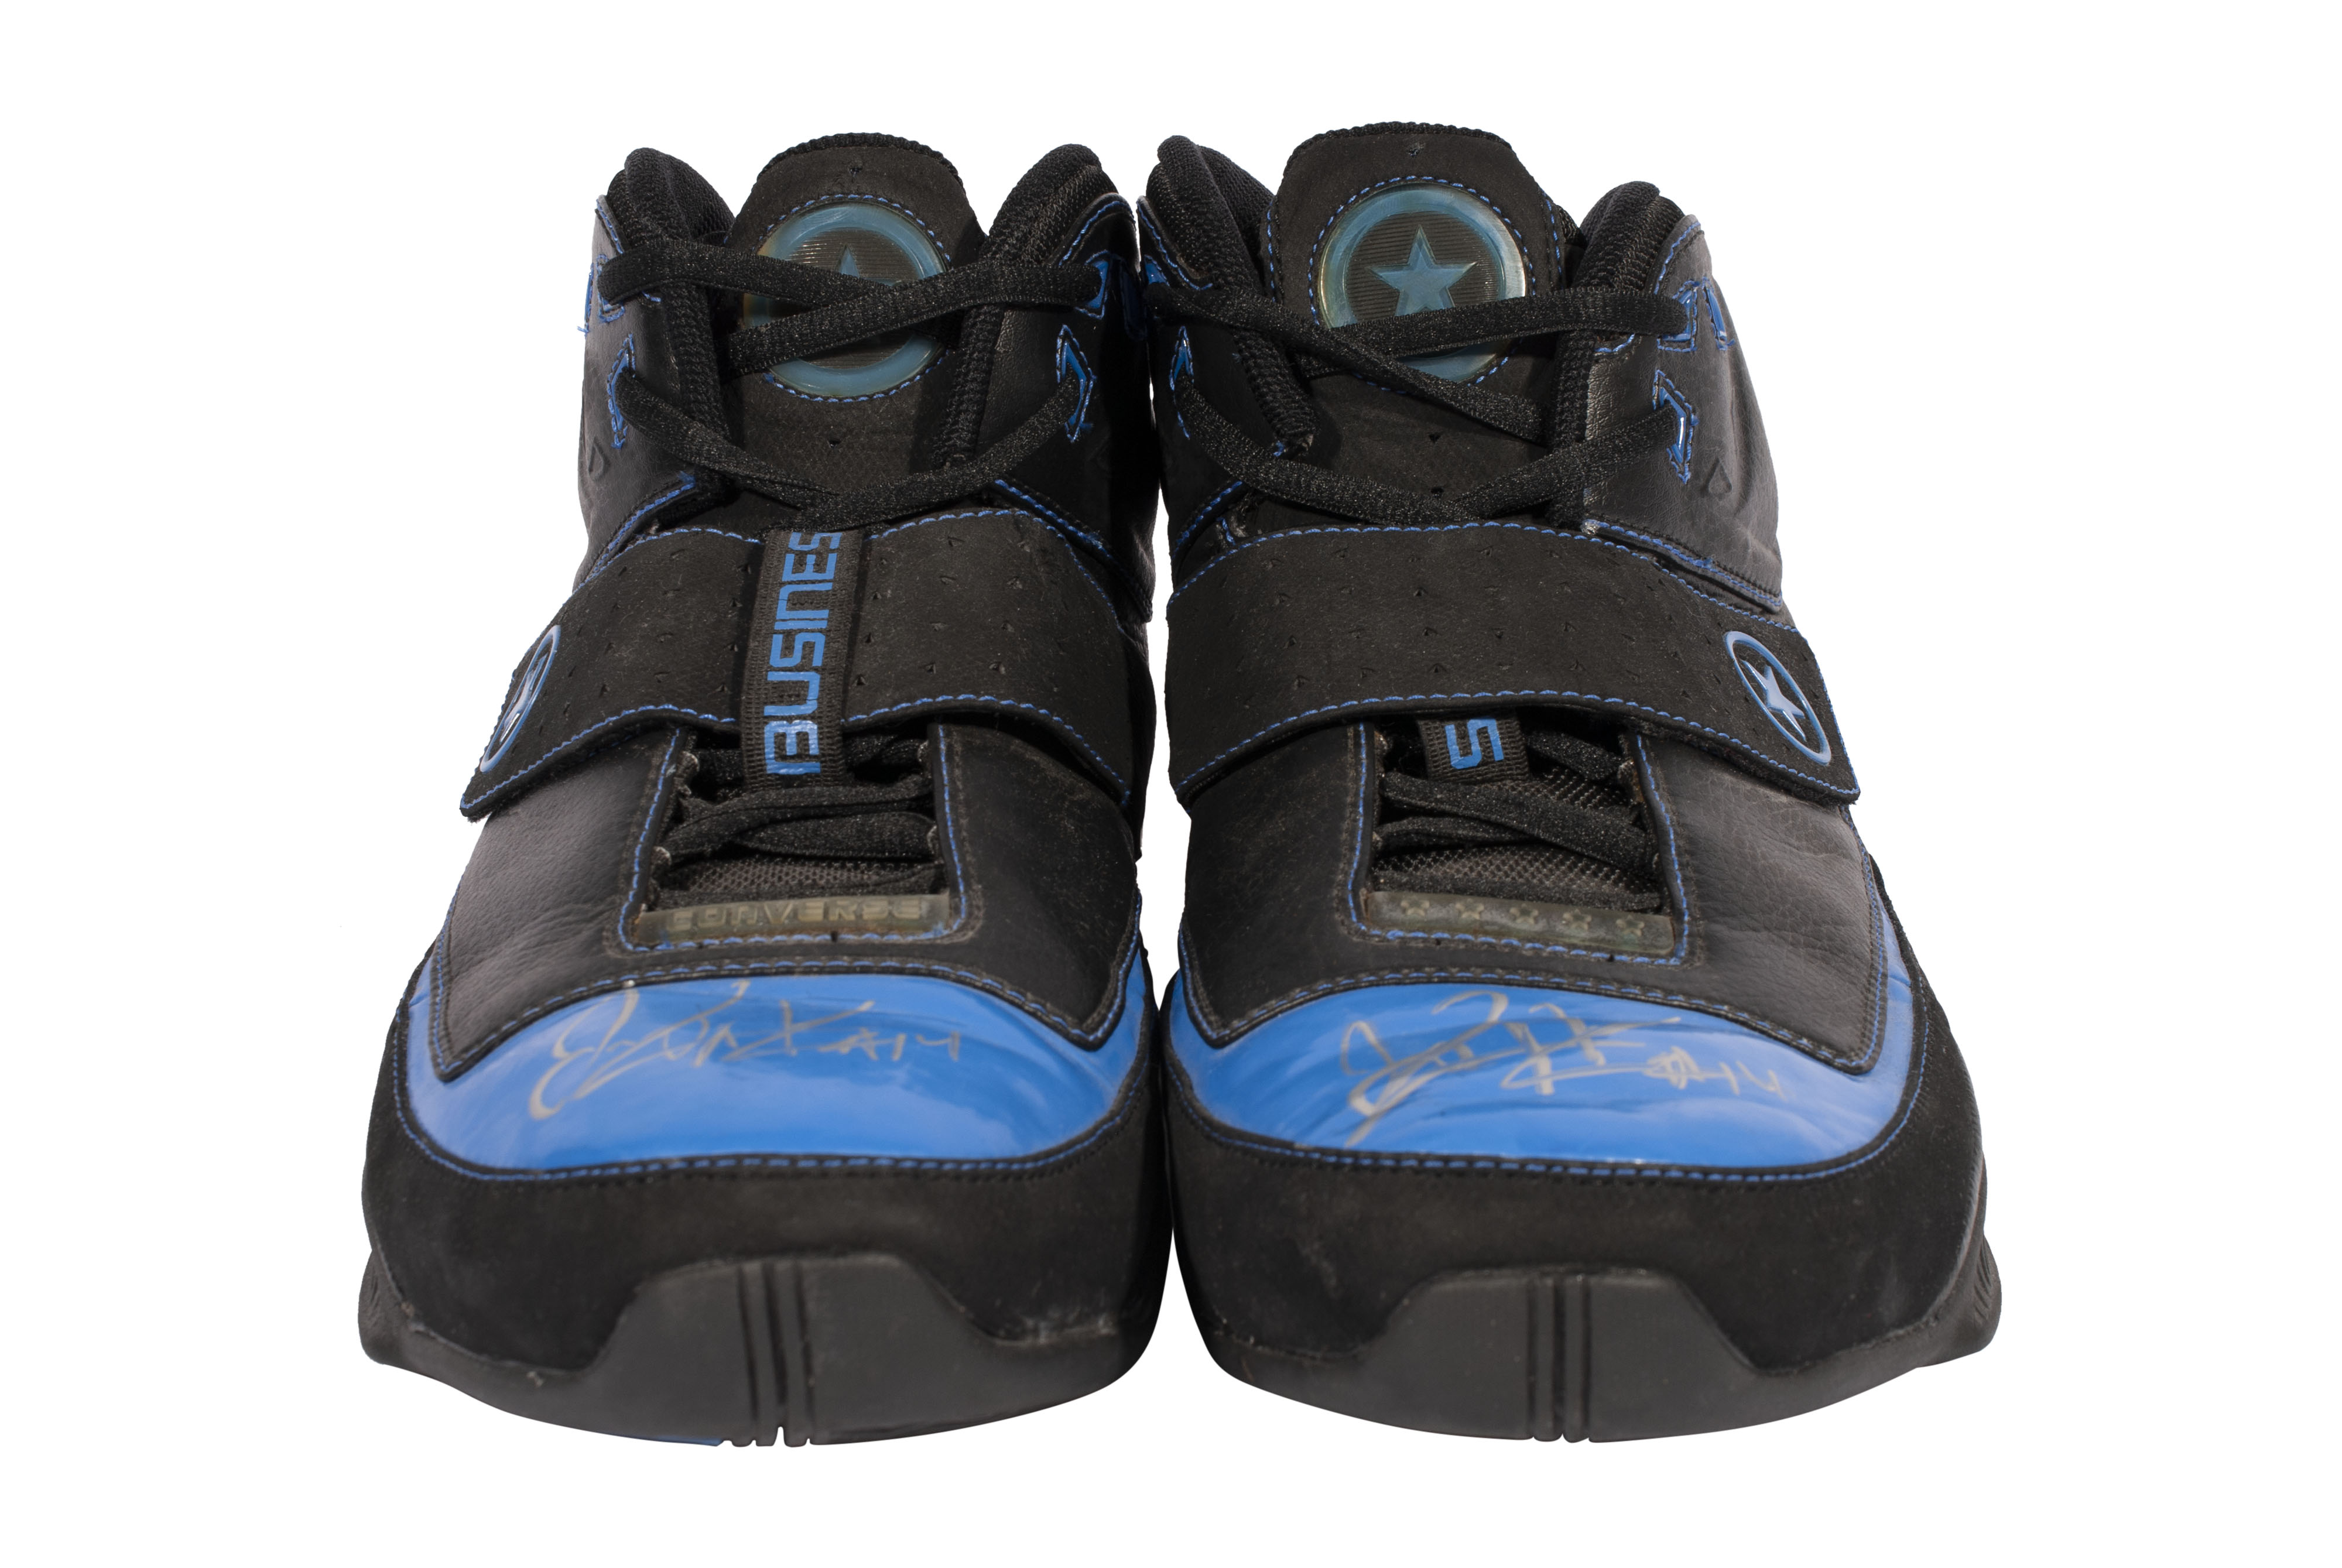 jameer nelson shoes